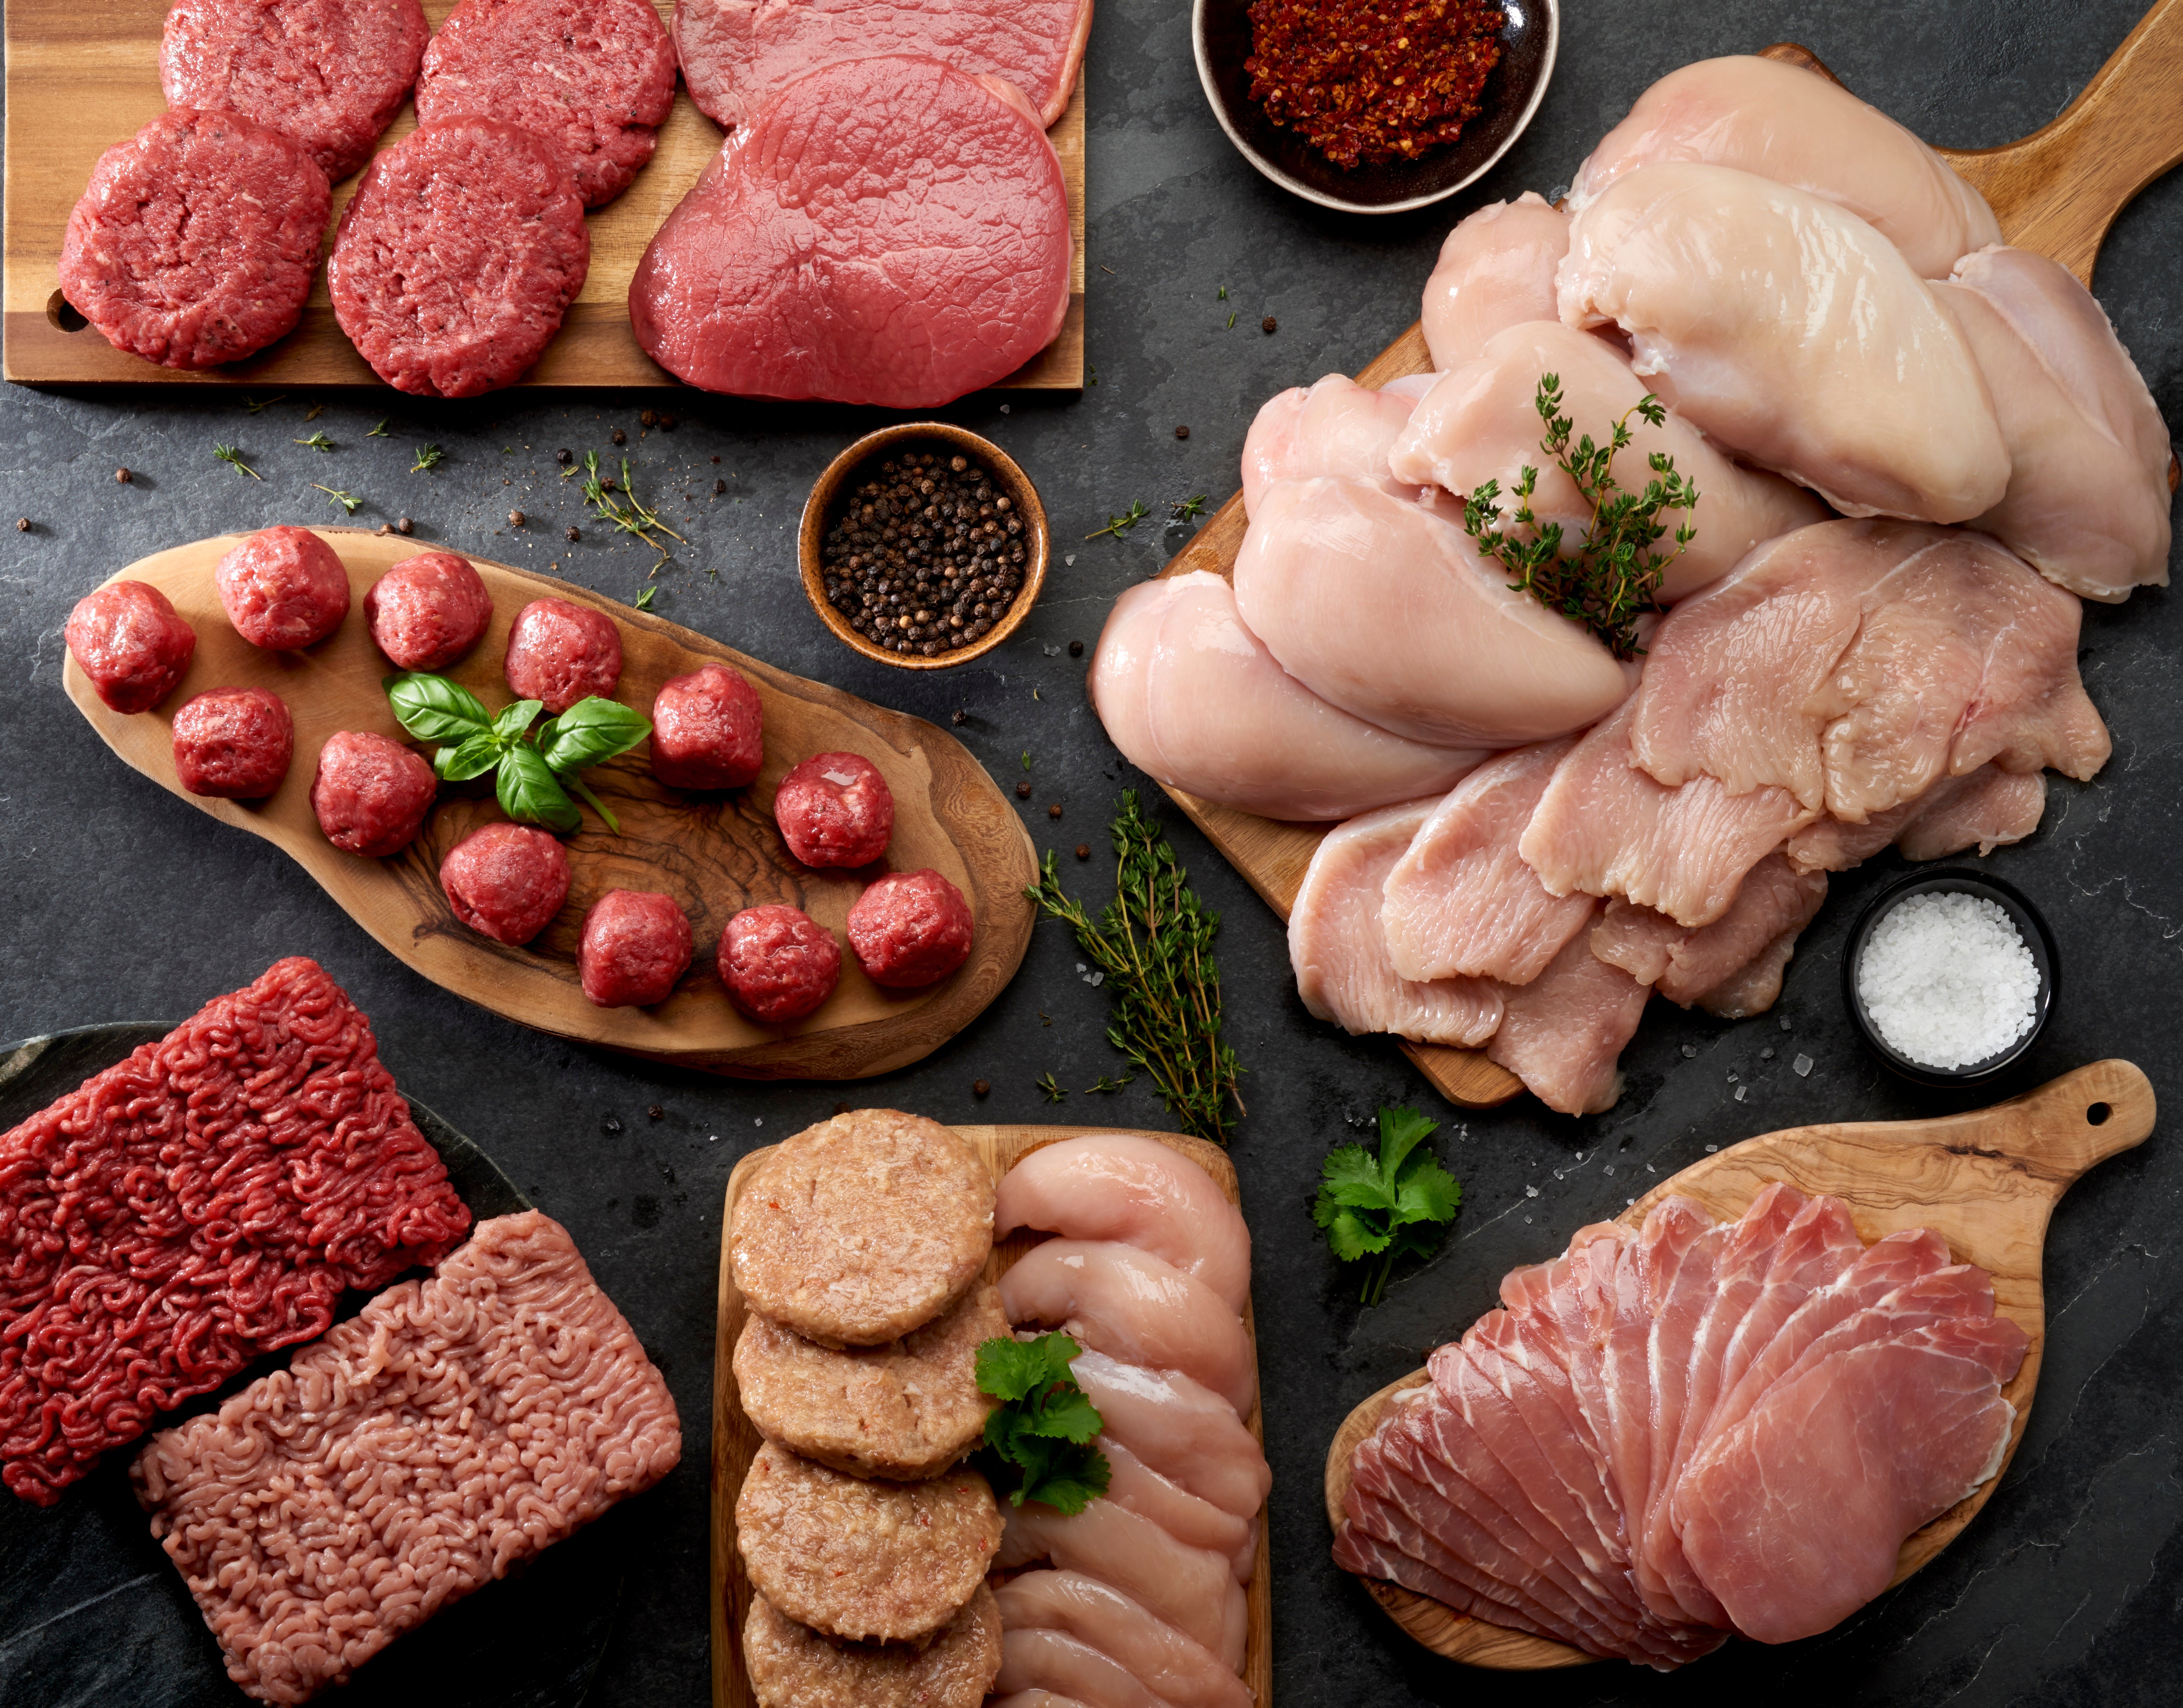 Morrisons launches lean meat box for fitness fans